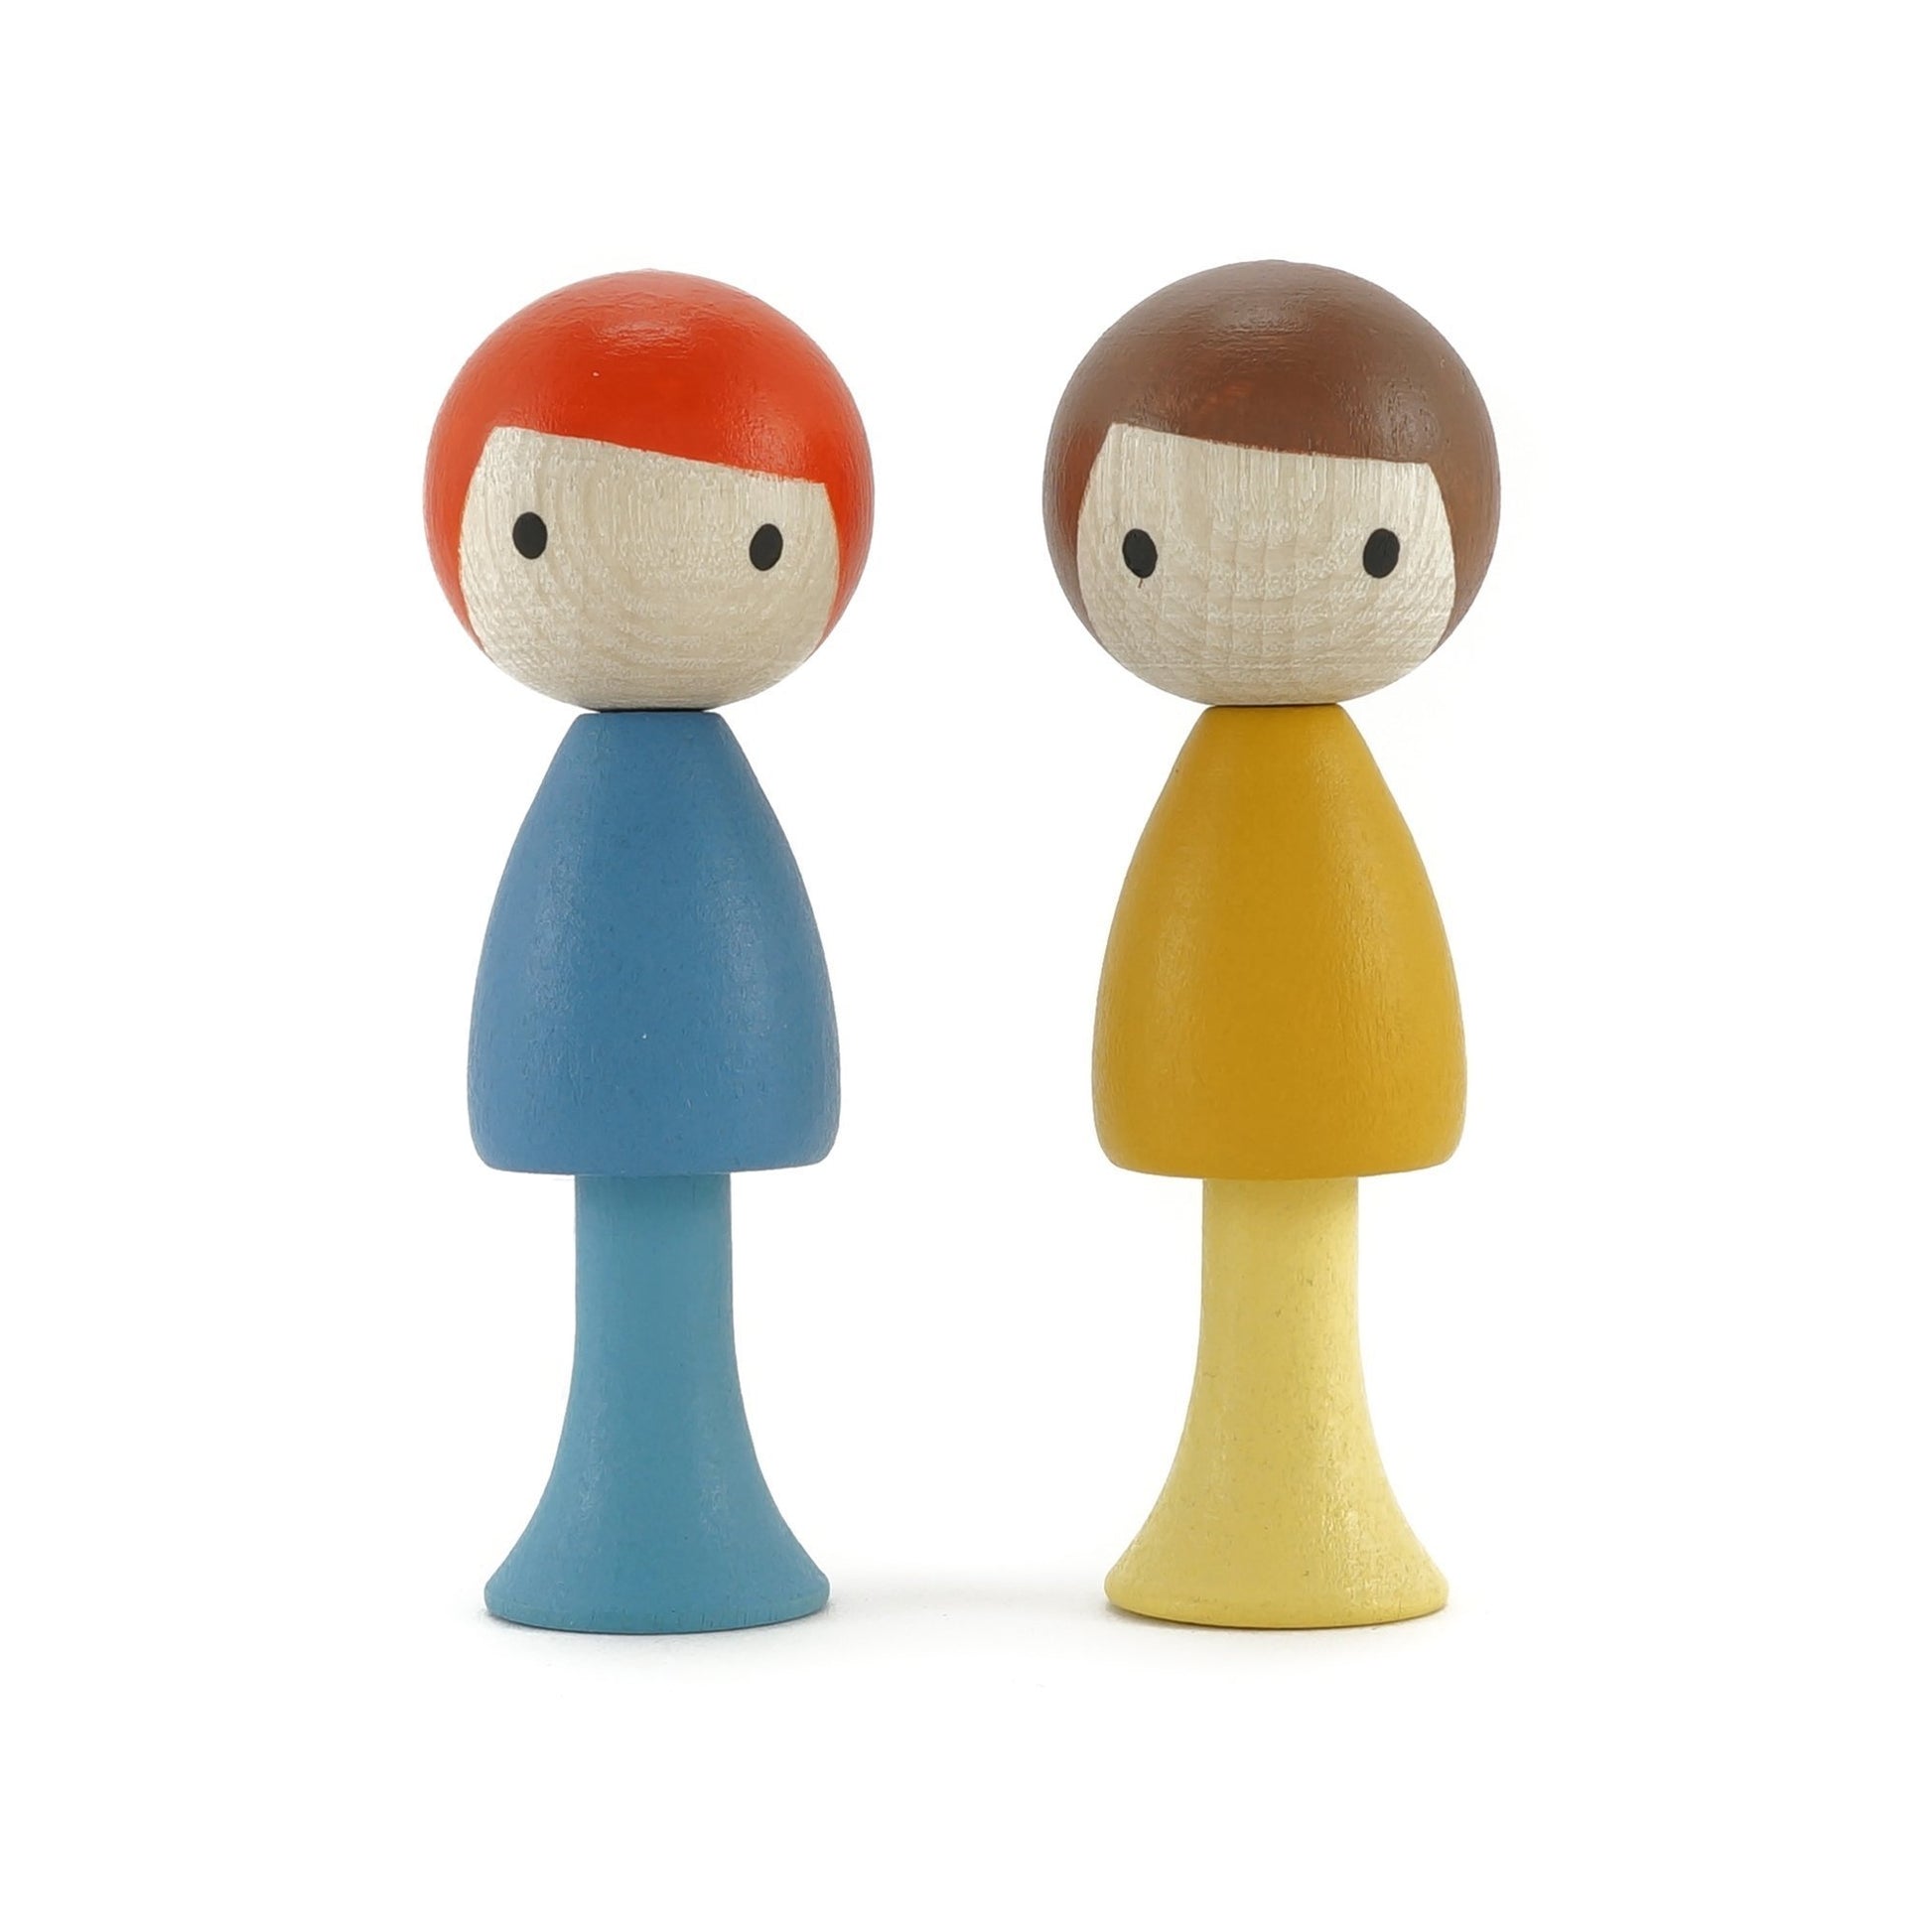 CLiCQUES Magnetic Figurines - Marco & Ben - Wood Wood Toys Canada's Favourite Montessori Toy Store